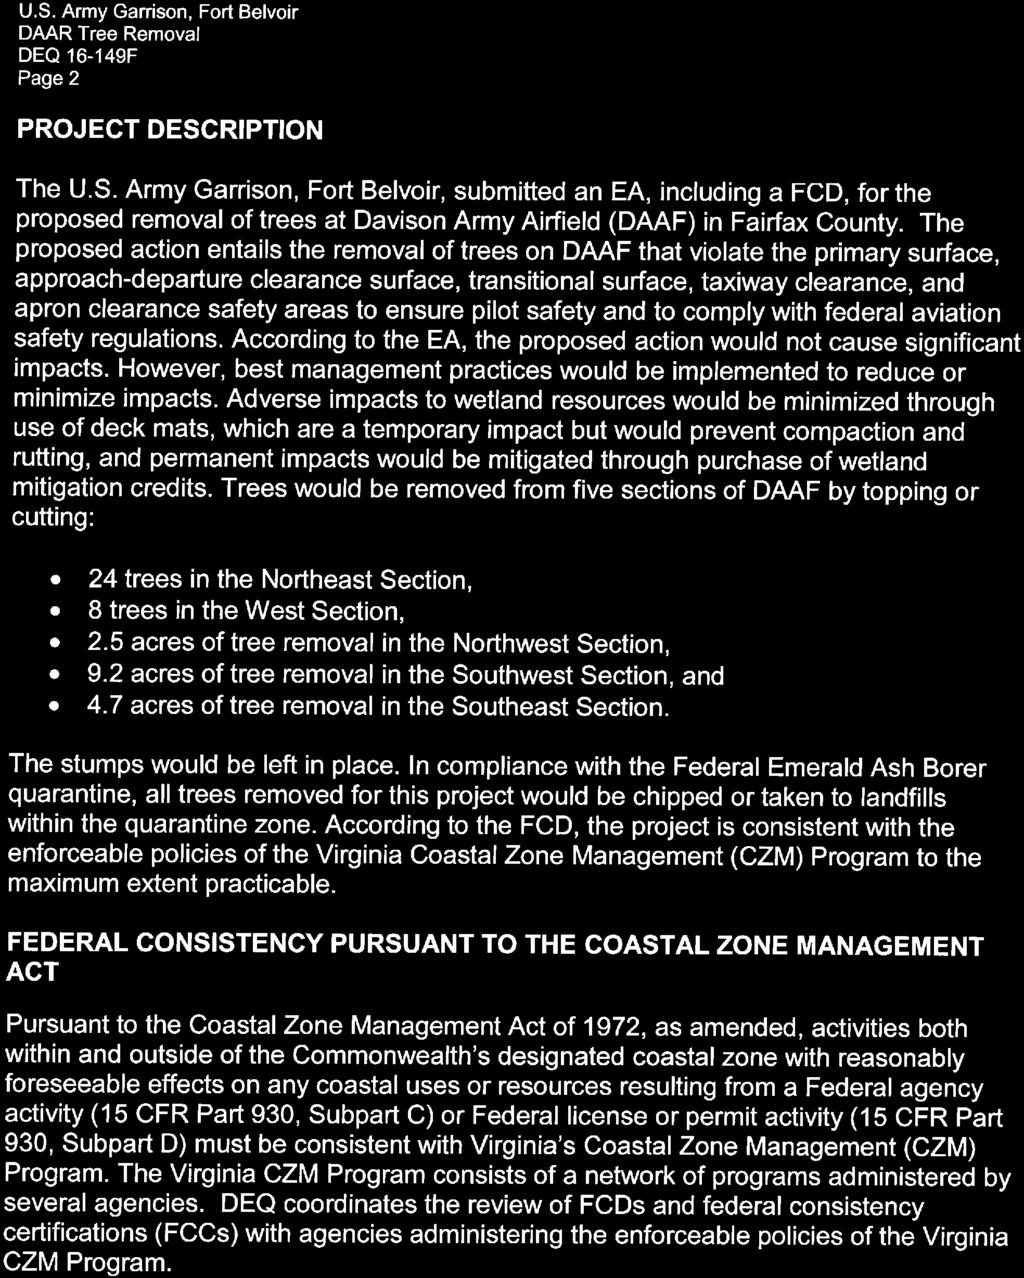 U. S. Army Garrison, Fort Belvoir DAAR Tree Removal DEQ 16-149F Page 2 PROJECT DESCRIPTION The U. S. Army Garrison, Fort Belvoir, submitted an EA, including a FCD, for the proposed removal of trees at Davison Army Airfield (DAAF) in Fairfax County.